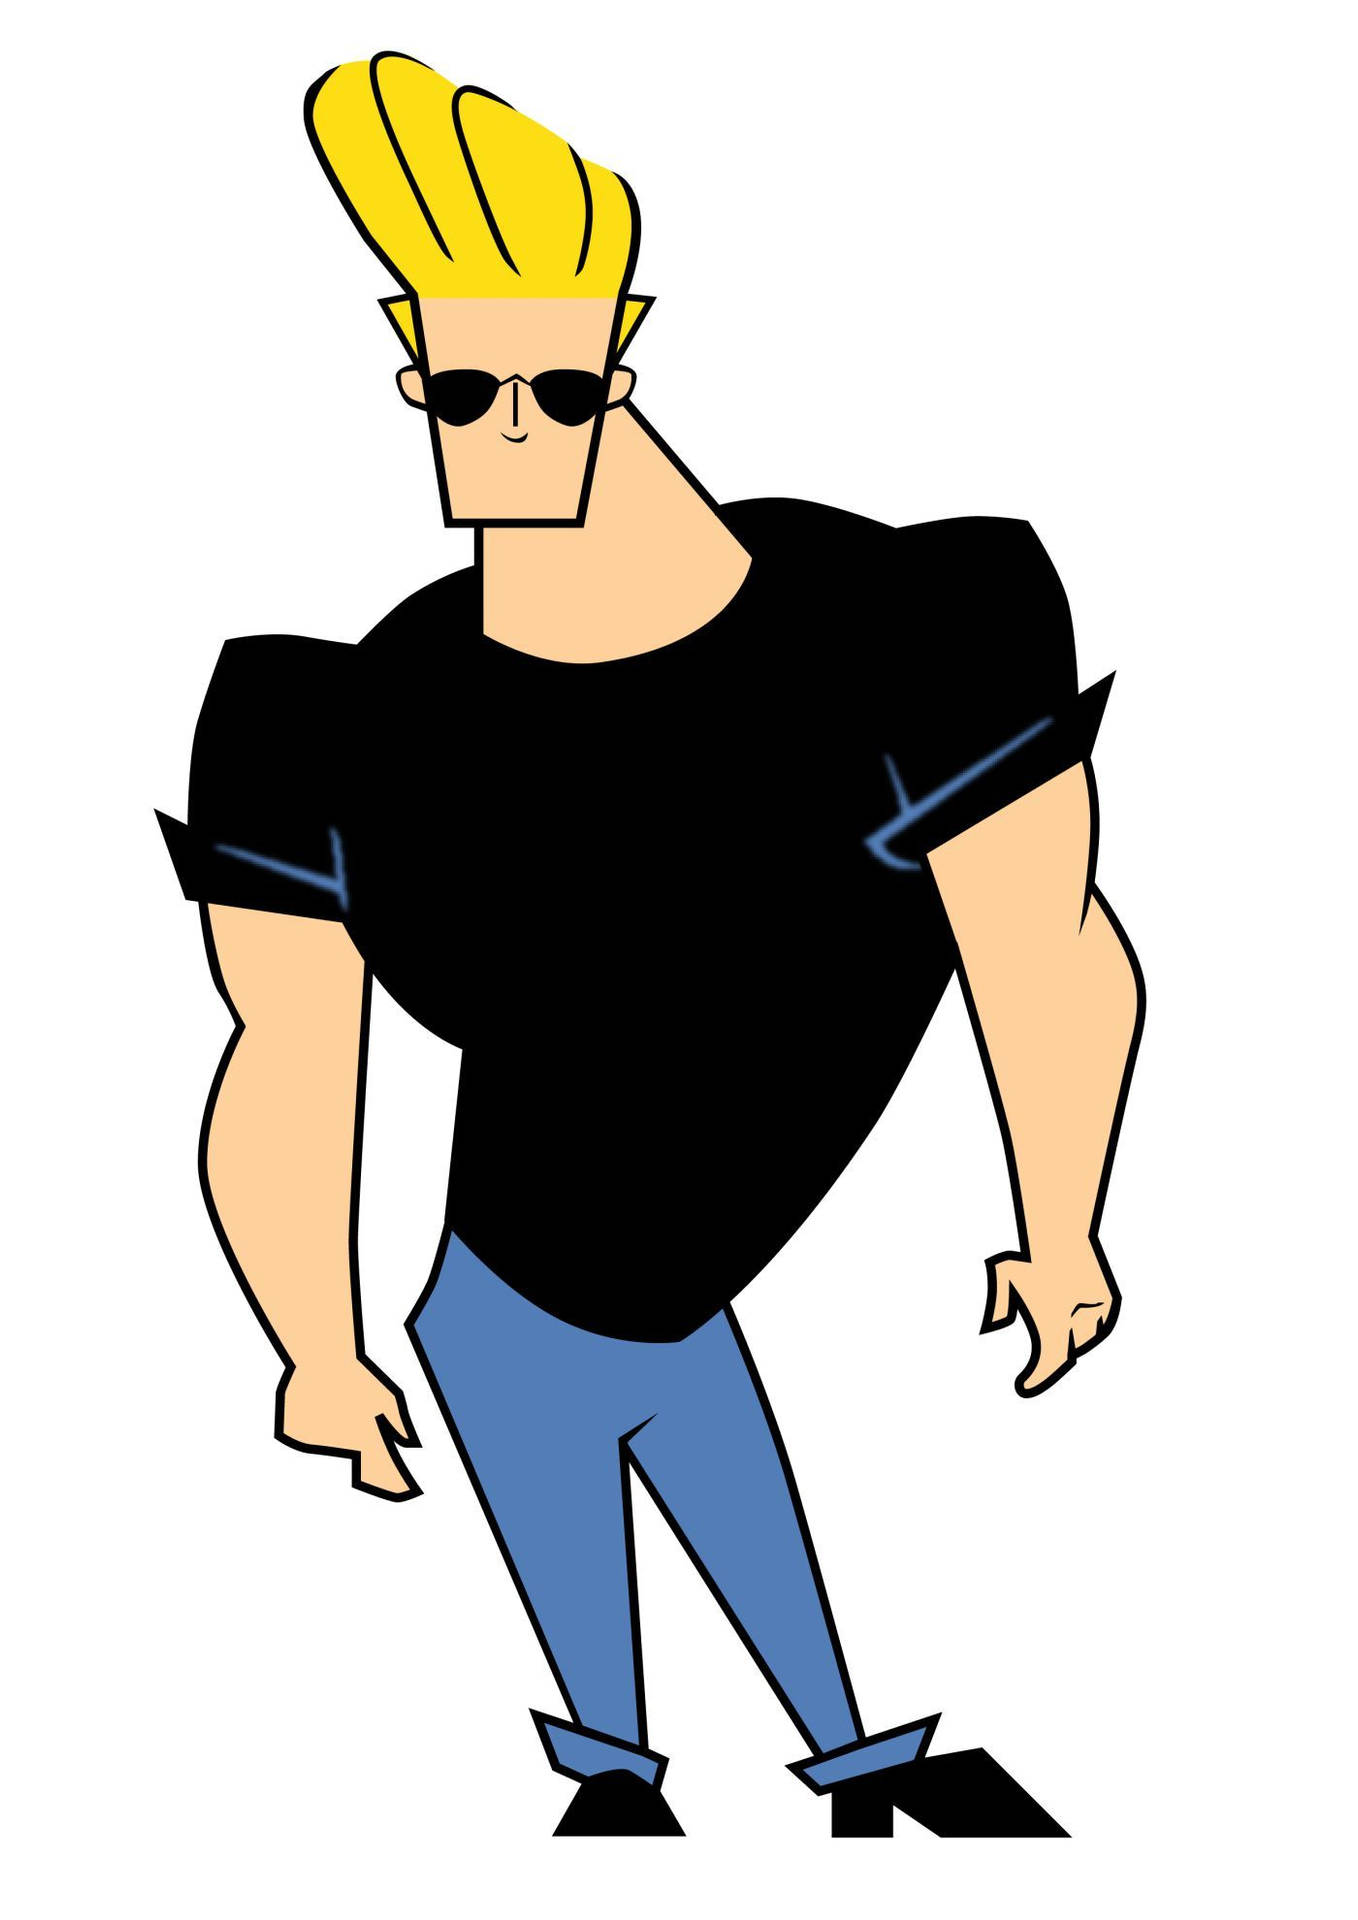 Cool Johnny Bravo Flexing Muscles Wallpaper